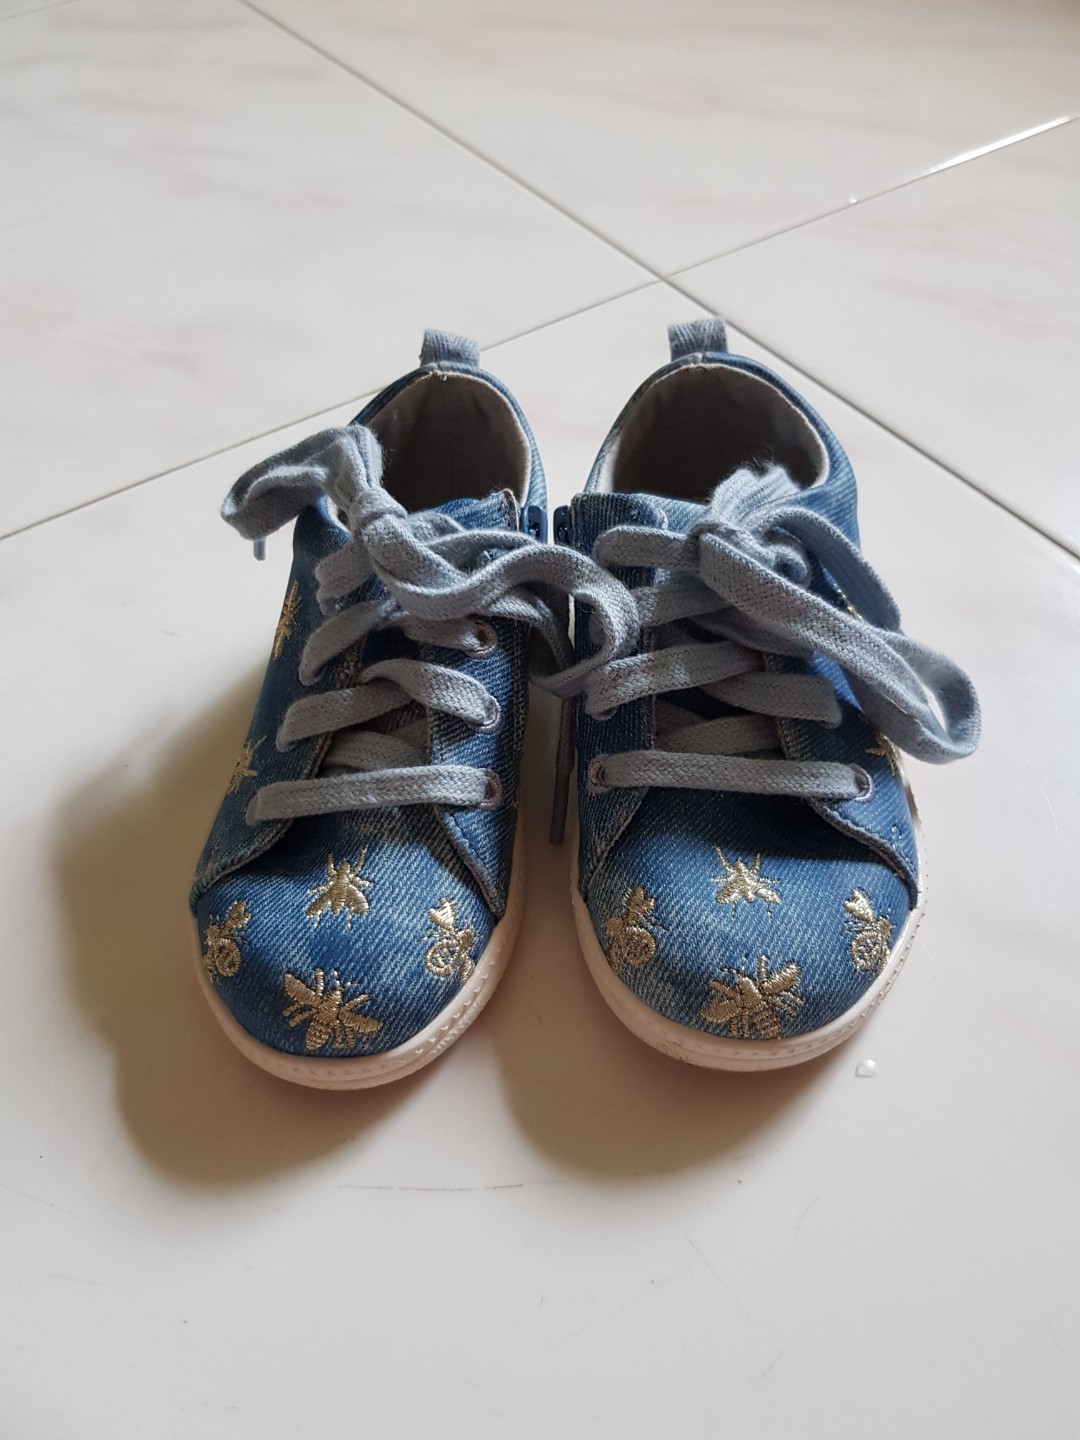 Reduced price!) Zara baby shoes, Babies 